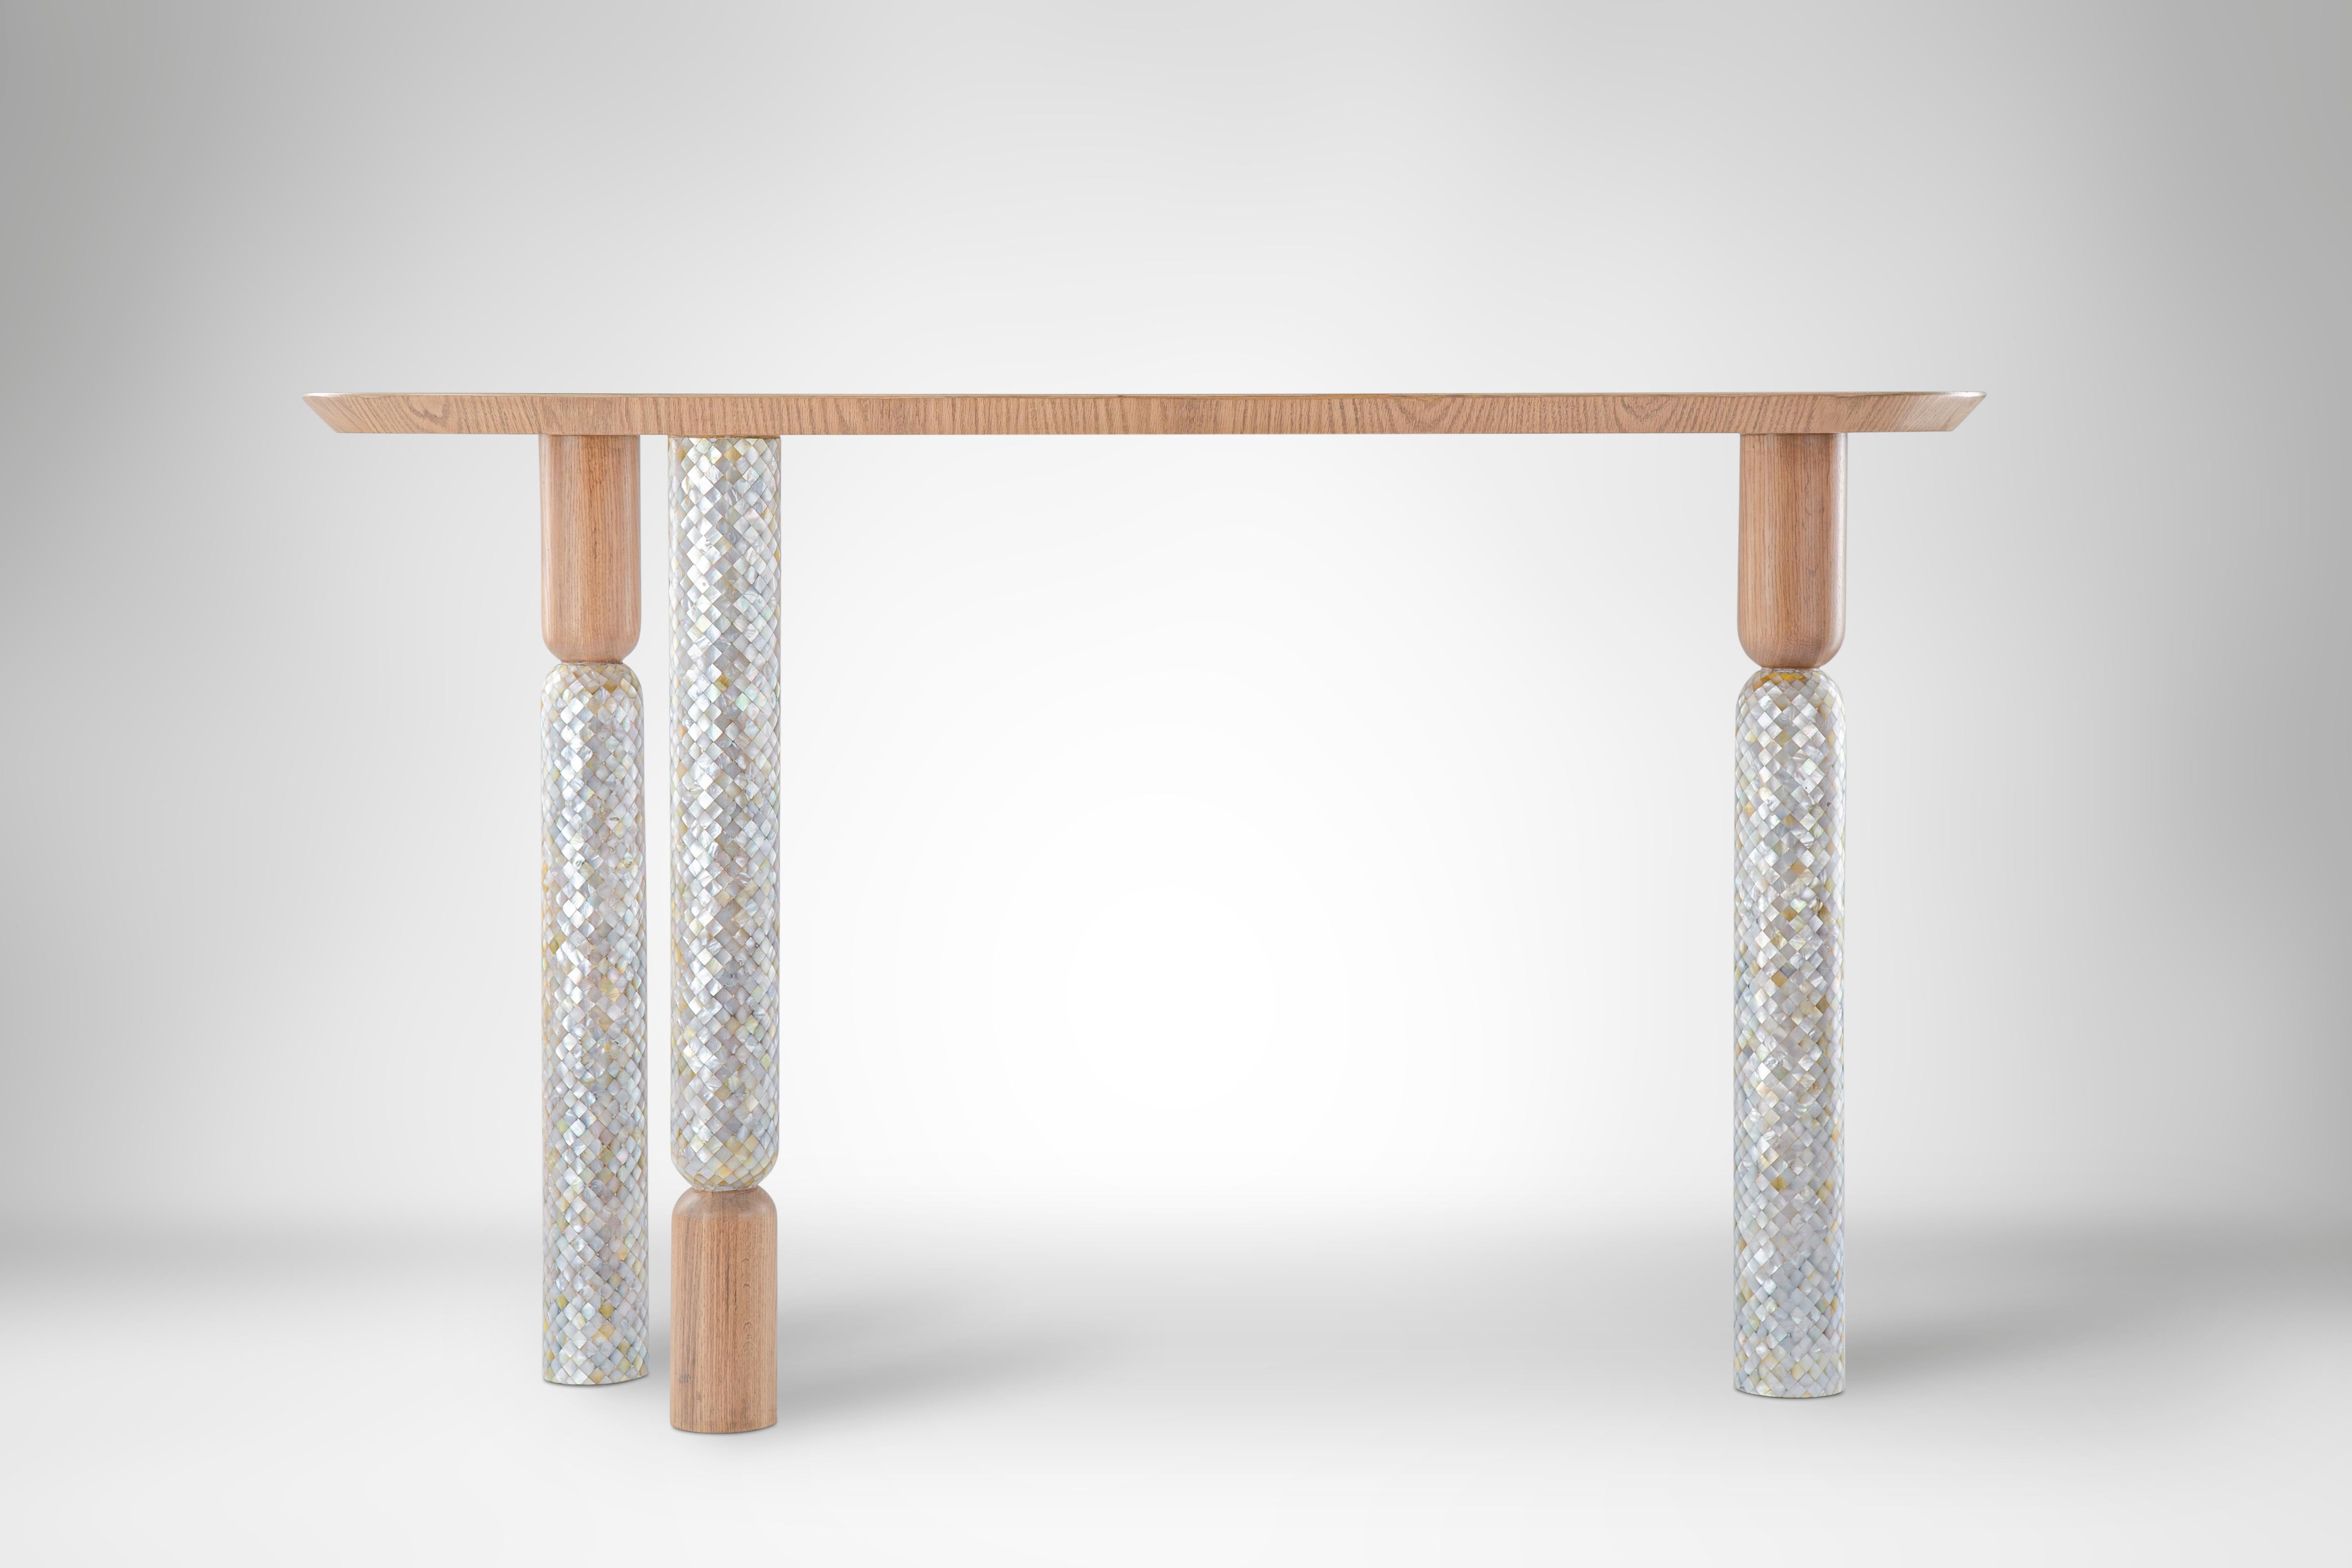 Minimalist Console with Hand-Laid Mother-of-Pearl Legs and Oak Top. 
Lotus comes in many shapes and forms. In our Joy console we abstracted three lotus flowers, perfectly balancing together a clean Oak top in minimalist form. The mother-of-pearl is